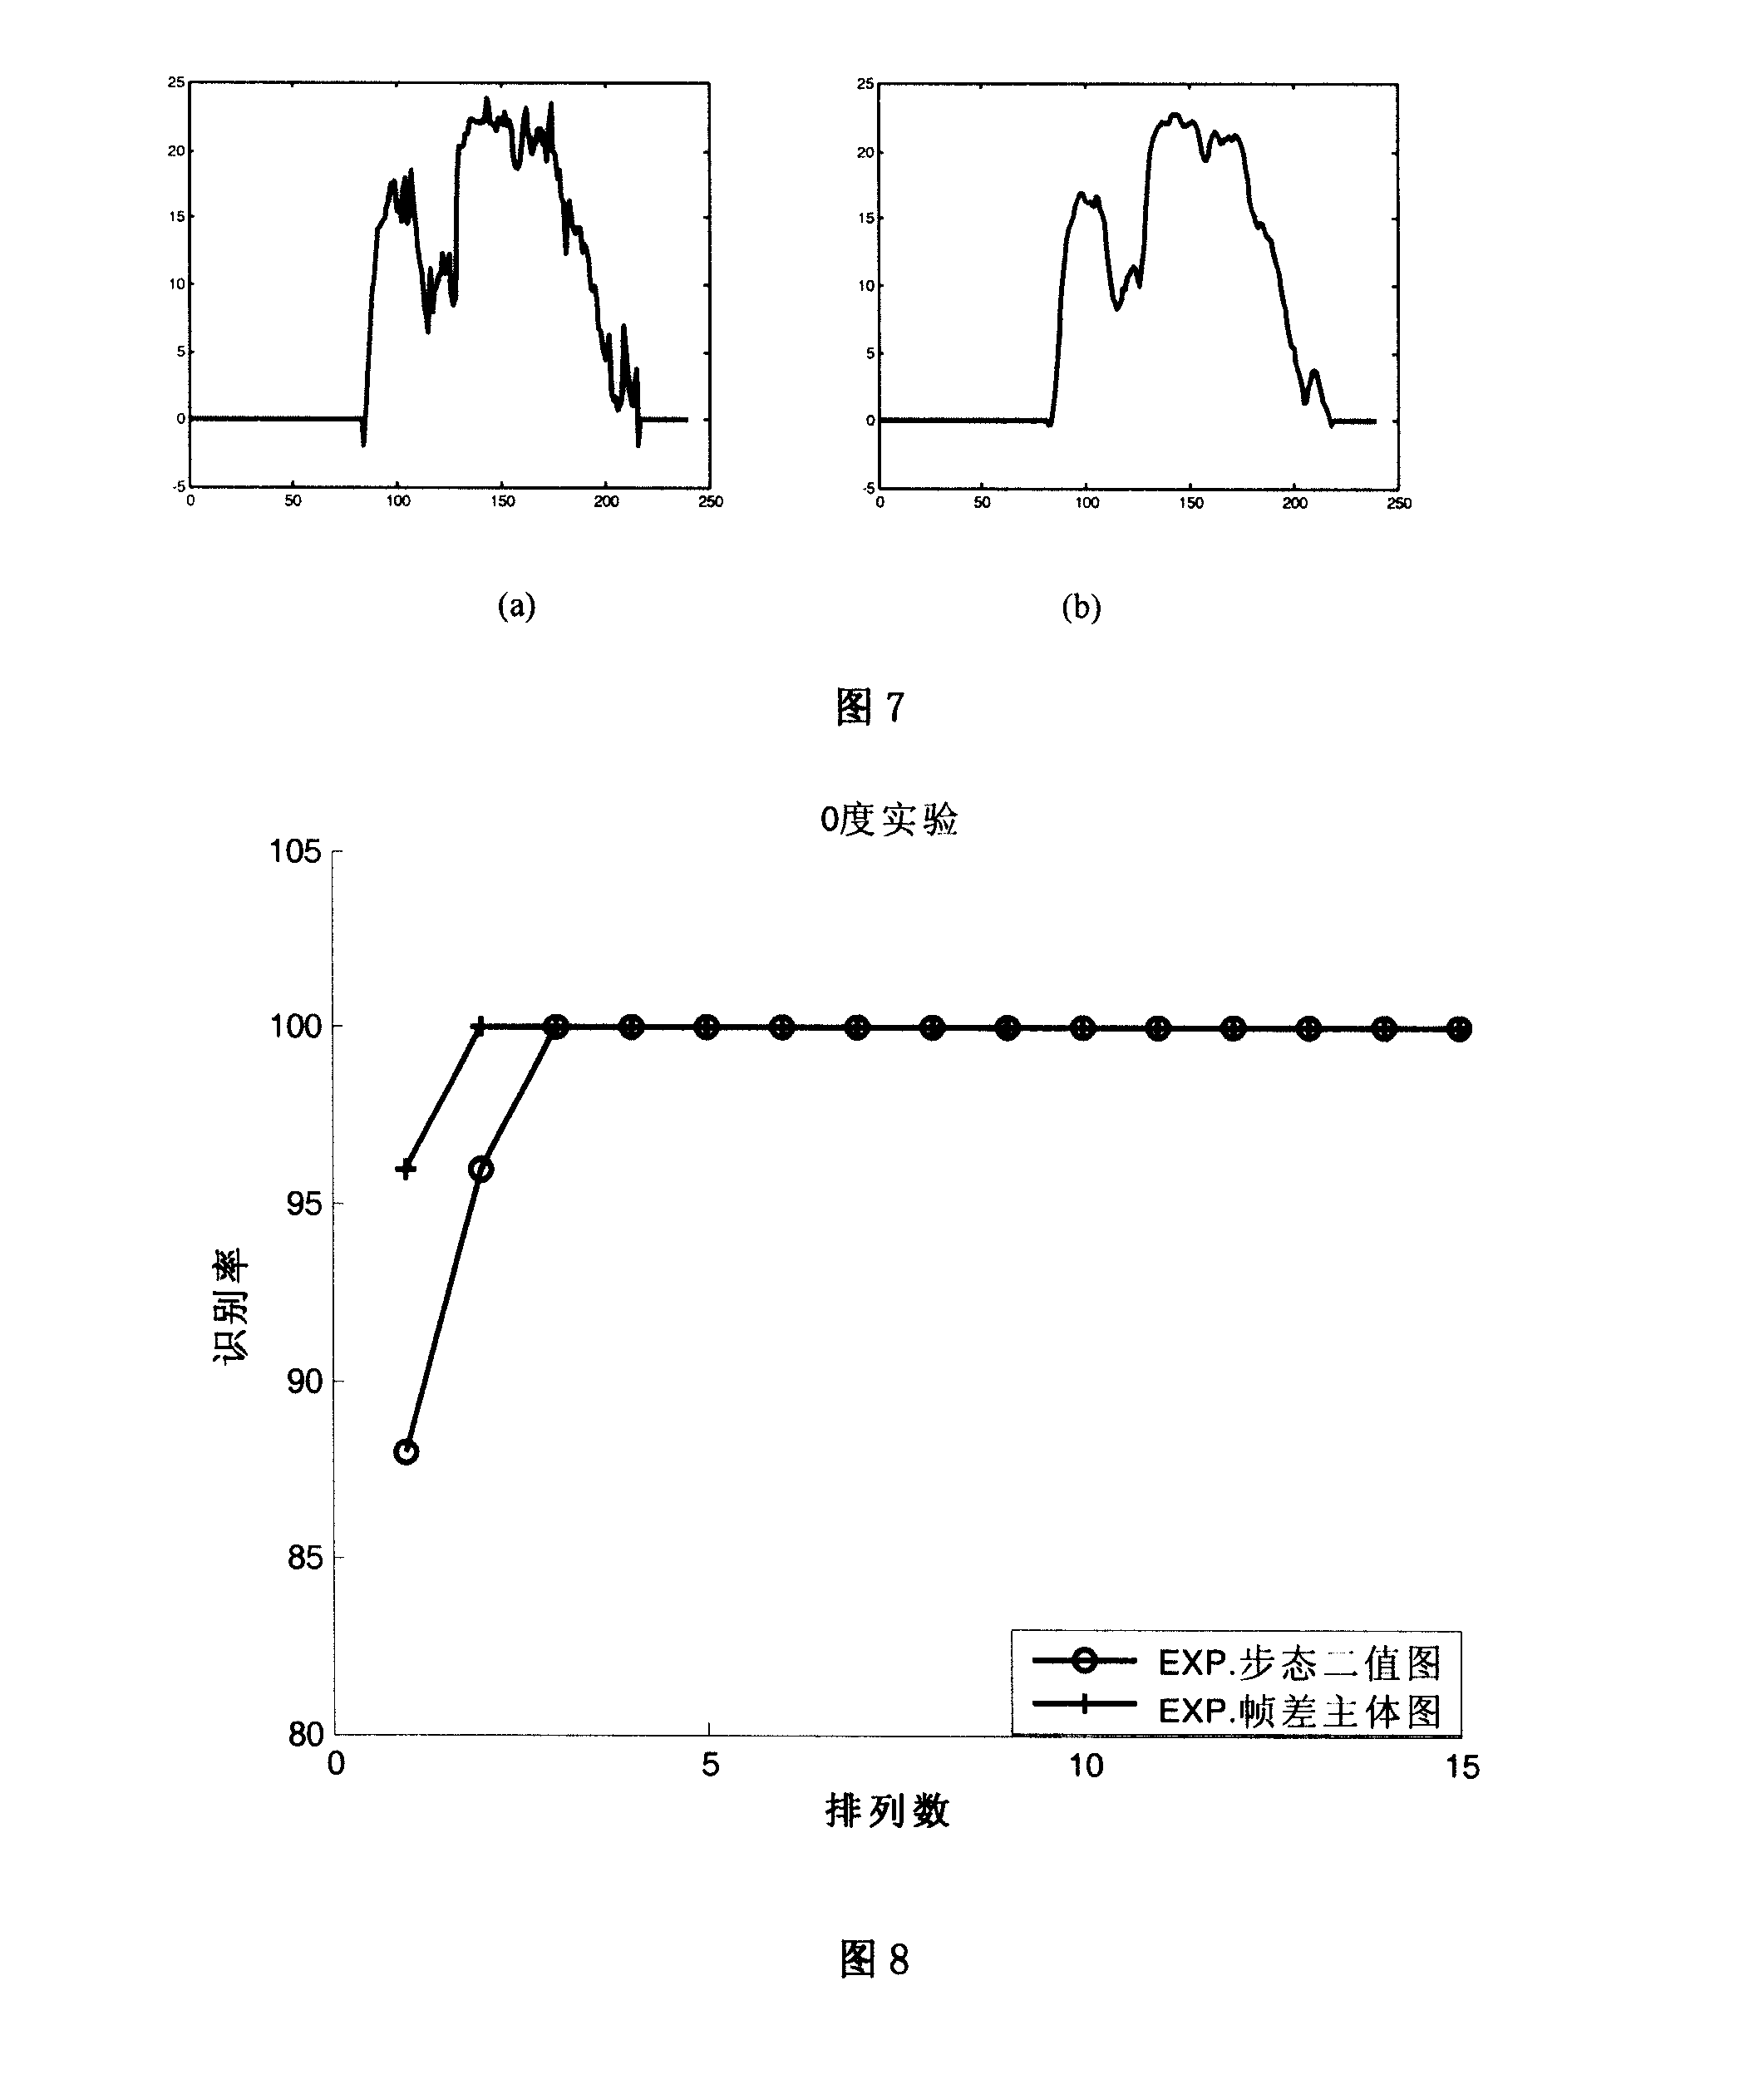 Method for compensating for gait binary value distortion